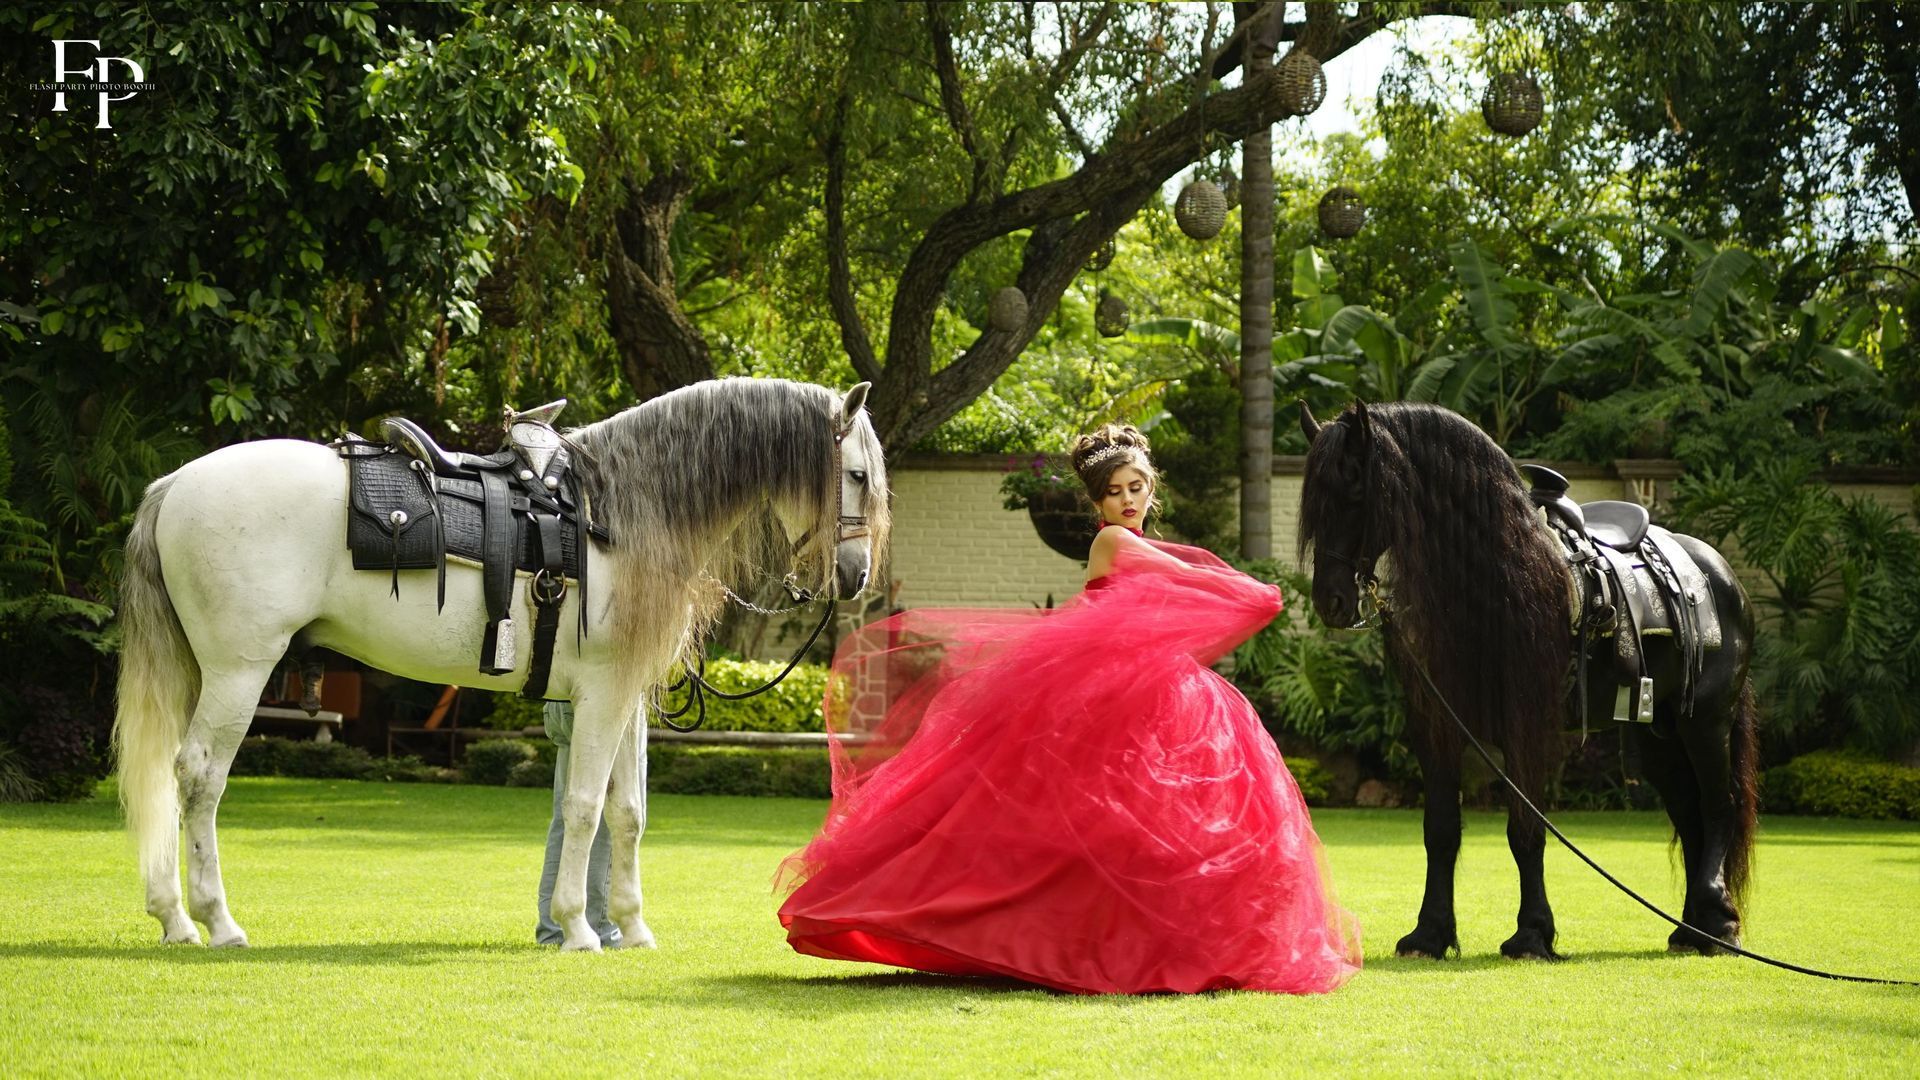 San Antonio Quinceañera performs a dance with two gorgeous horses behind her.